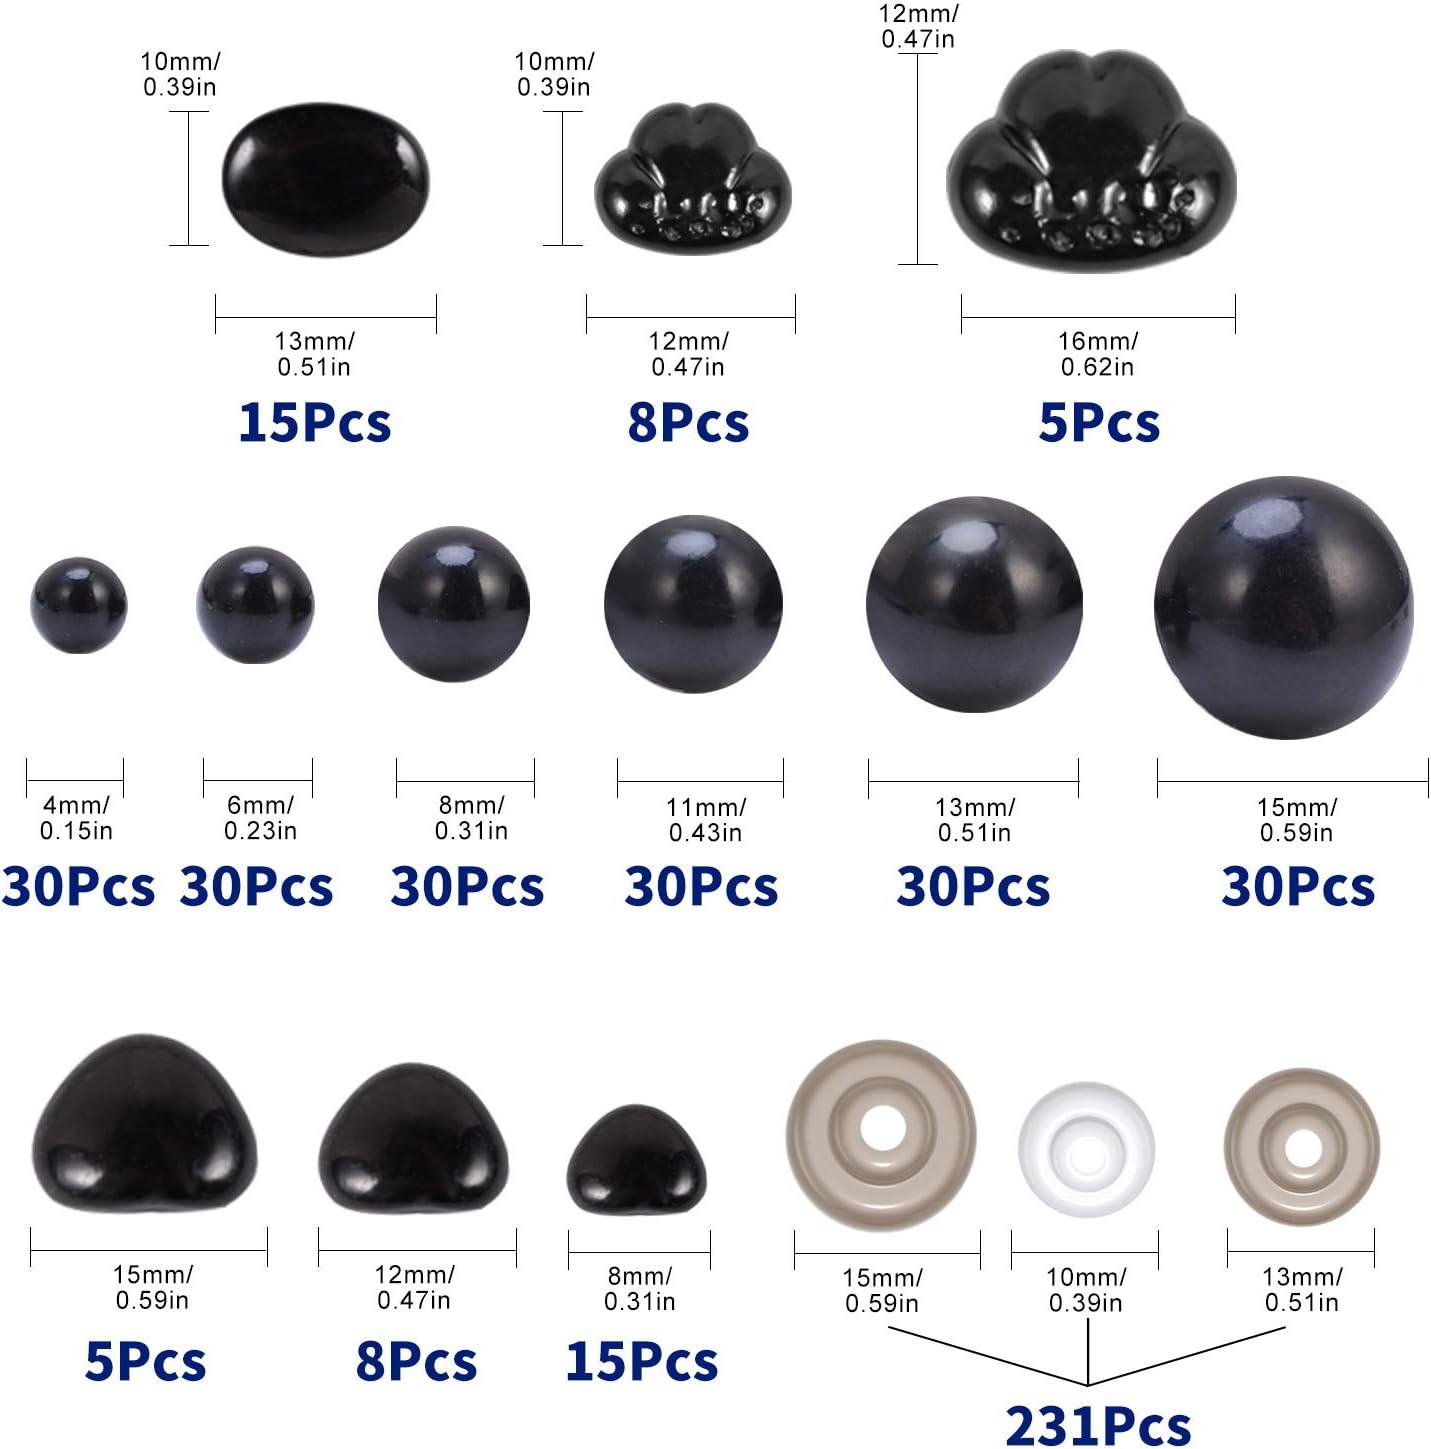 12mm x 9mm Black Oval Safety Eyes Noses - 25 Pairs (50 Pieces Eyes, 50  Pieces Washers)